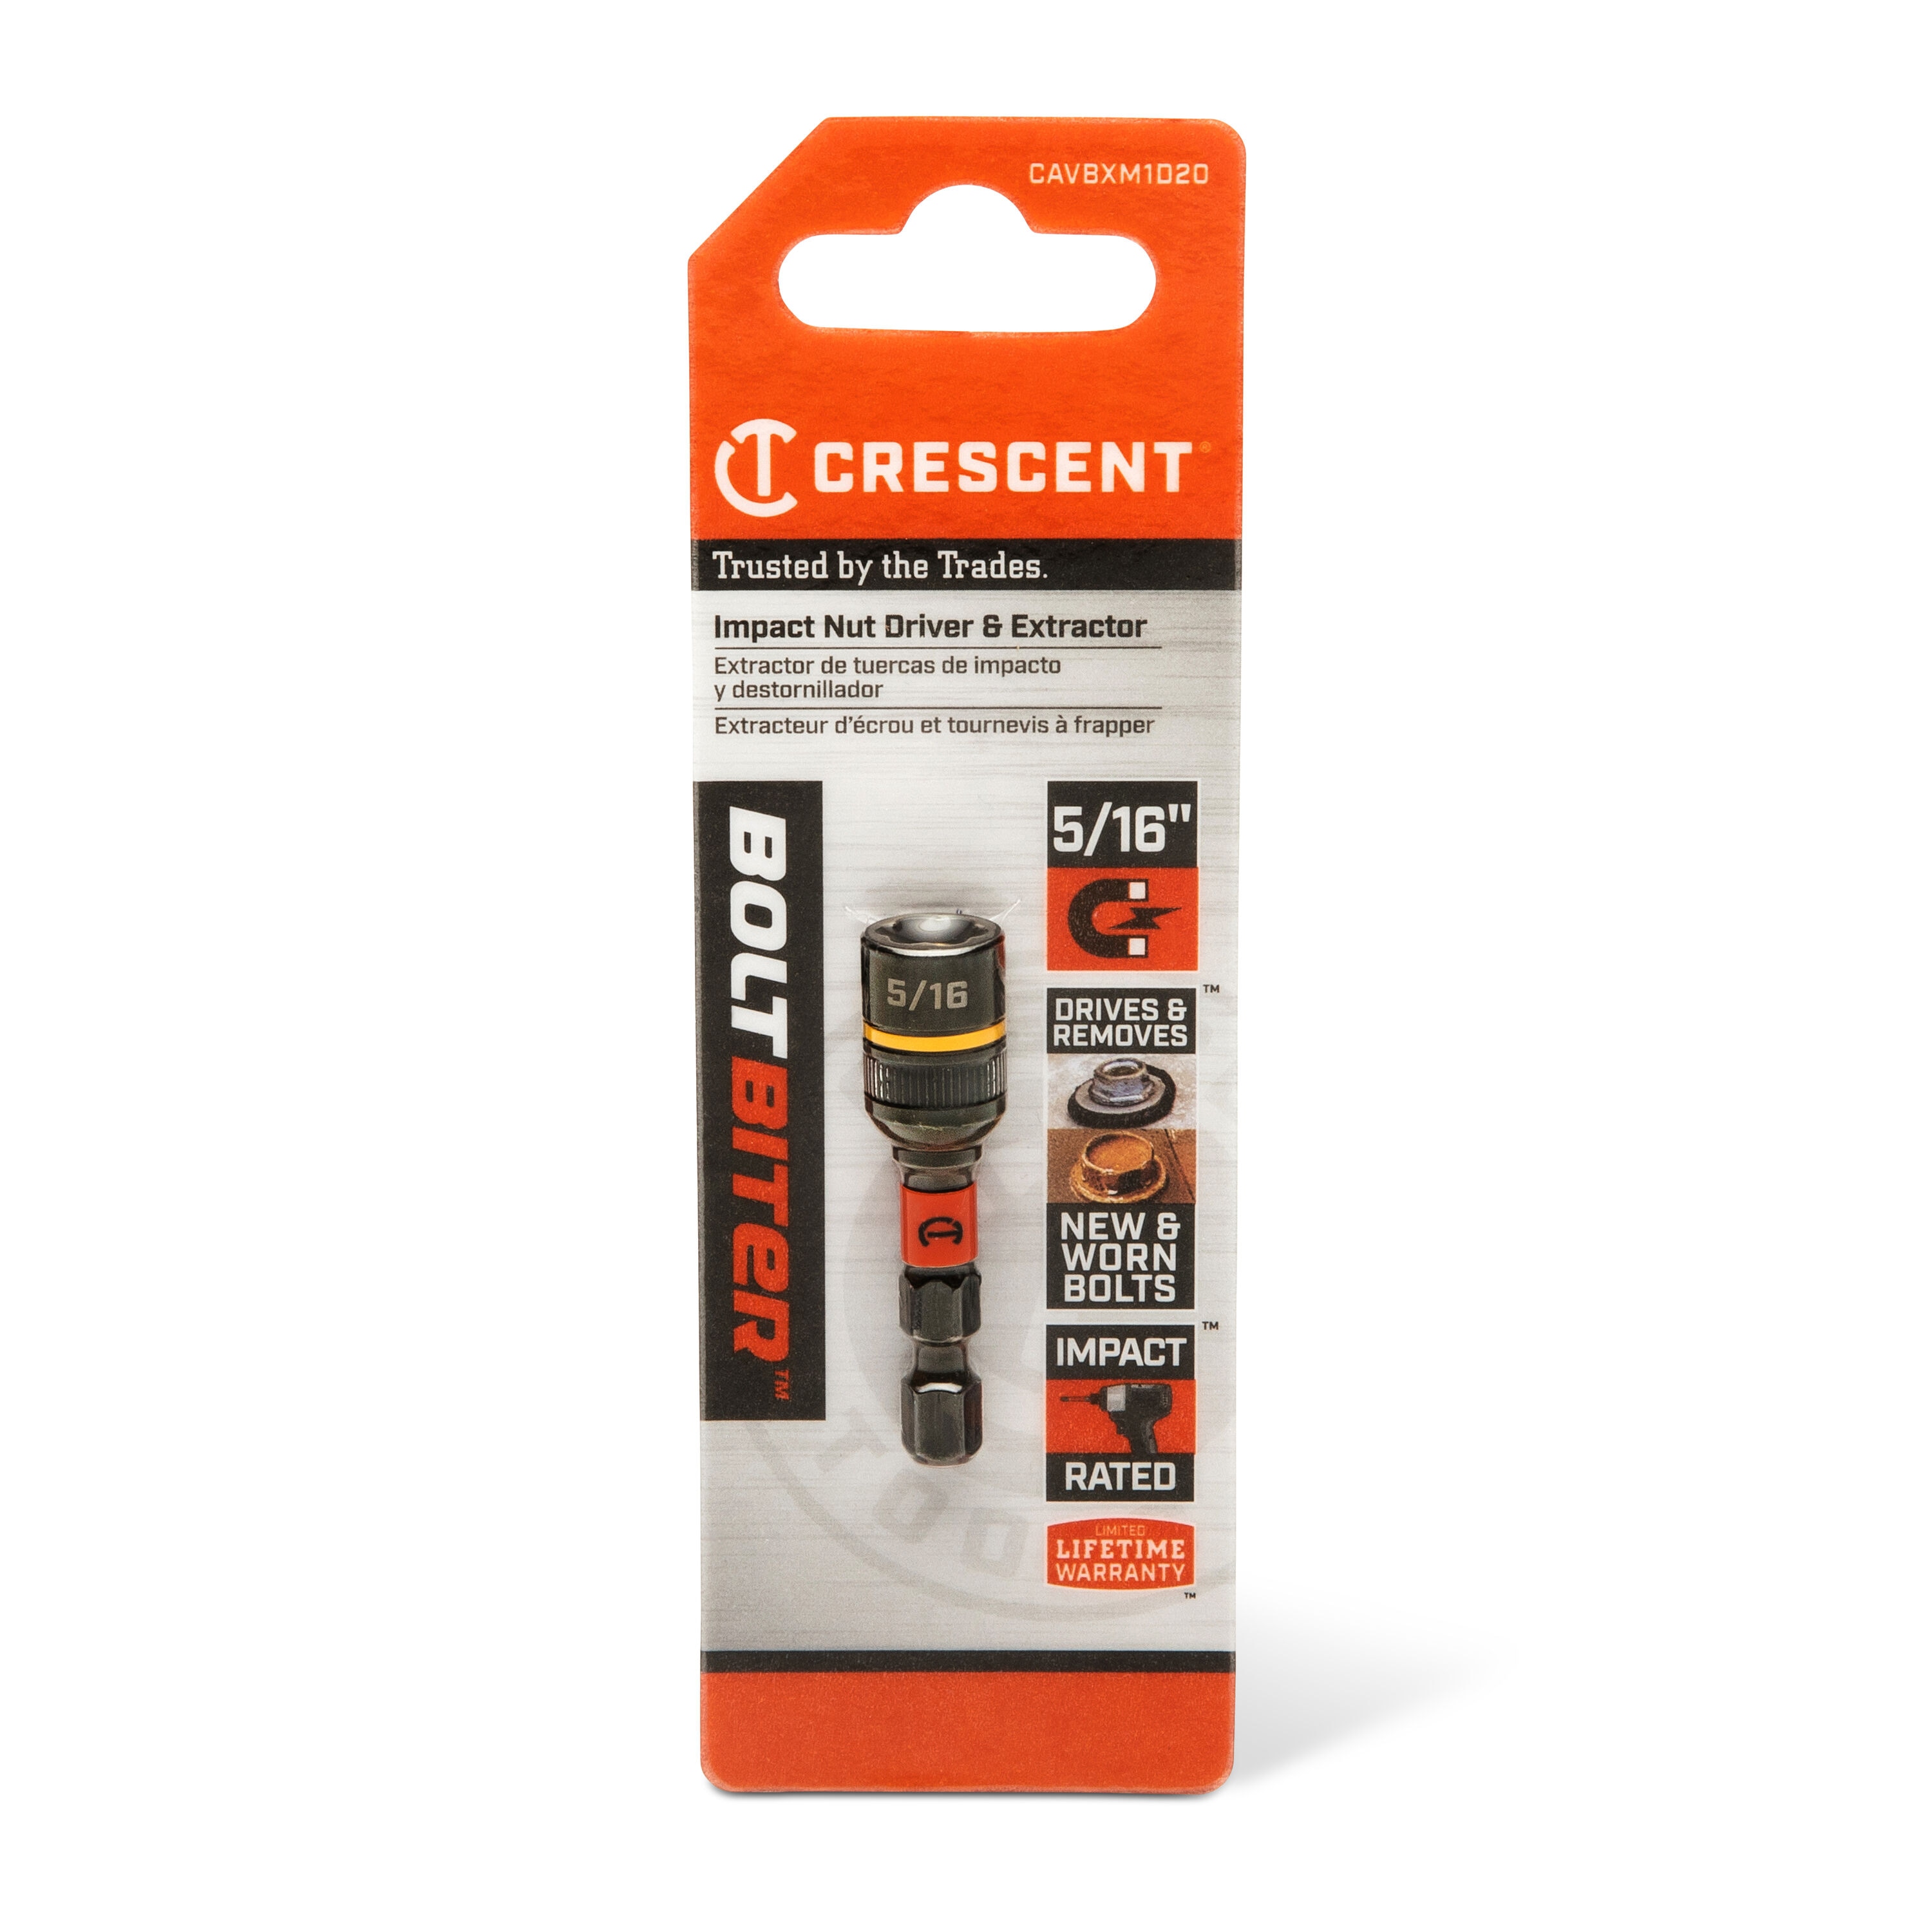 Crescent Bolt Biter Standard (Sae) 5/16-in drive Impact Bolt Extractor ...